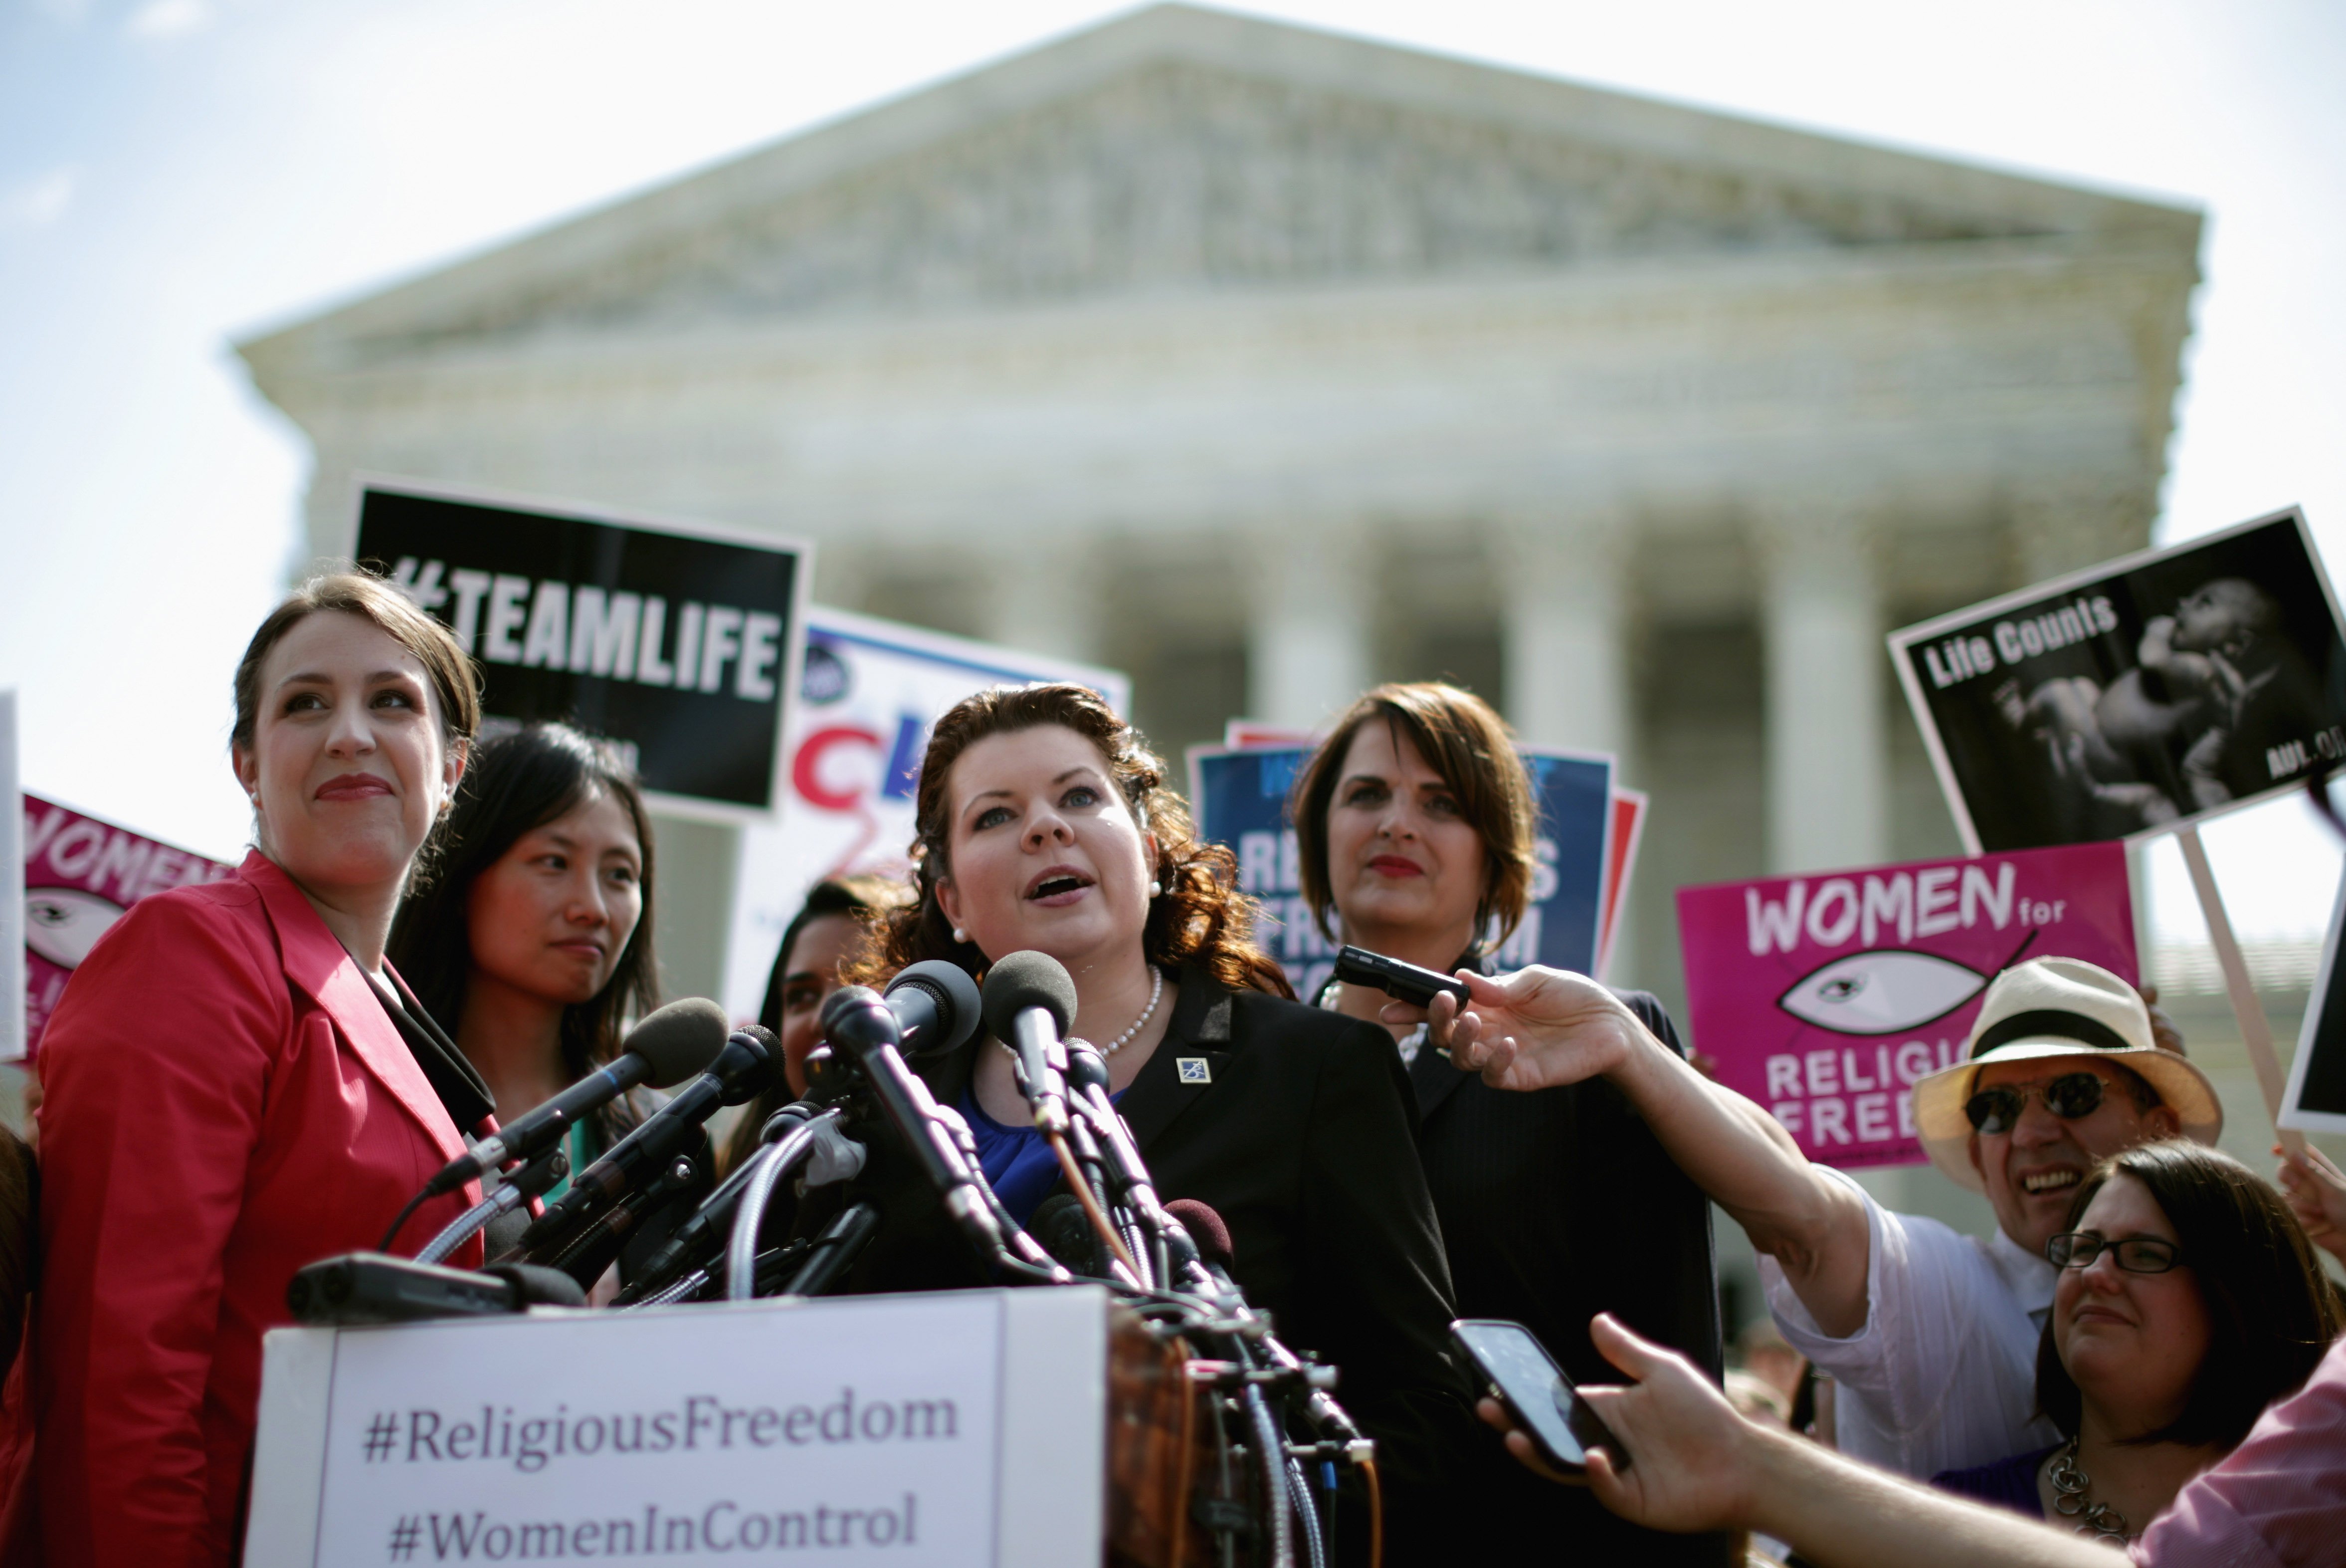 Lori Windham (C), senior counsel for The Becket Fund for Religious Liberty, addresses the news media in front of the Supreme Court after the decision in Burwell v. Hobby Lobby Stores June 30, 2014 in Washington. (Chip Somodevilla—Getty Images)